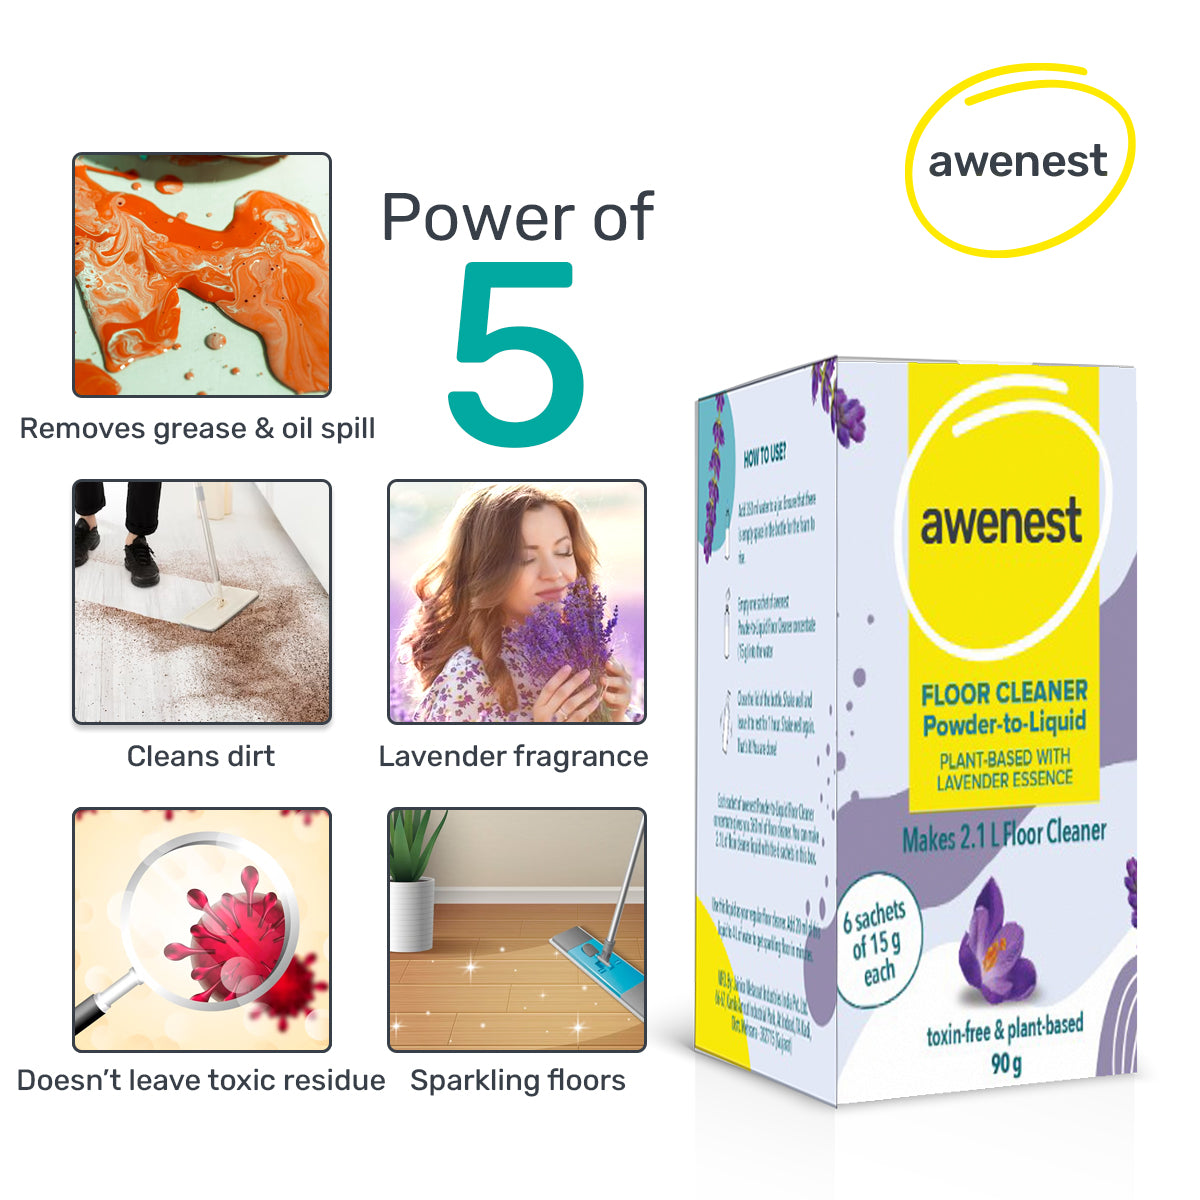 awenest No-toxin powder to liquid disinfectant floor and bathroom cleaner